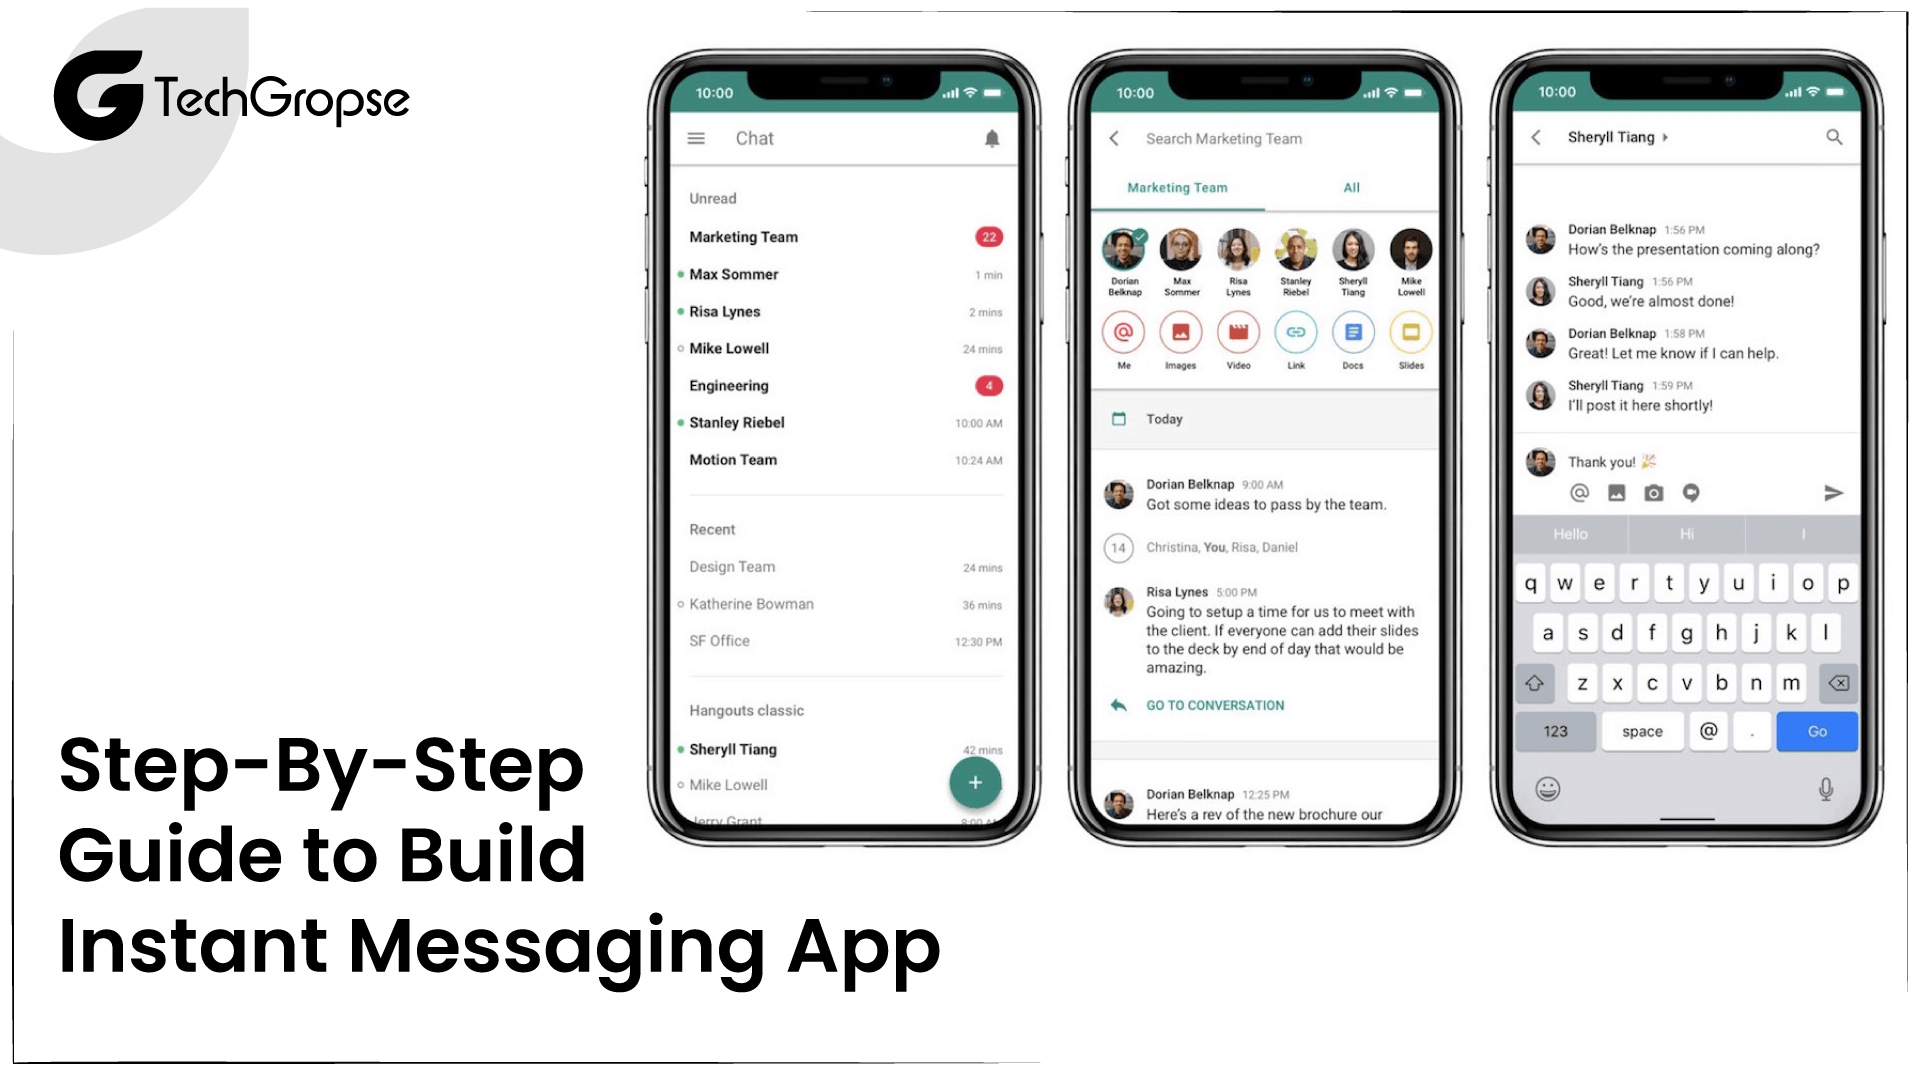 Step-By-Step Guide to Build Instant Messaging App